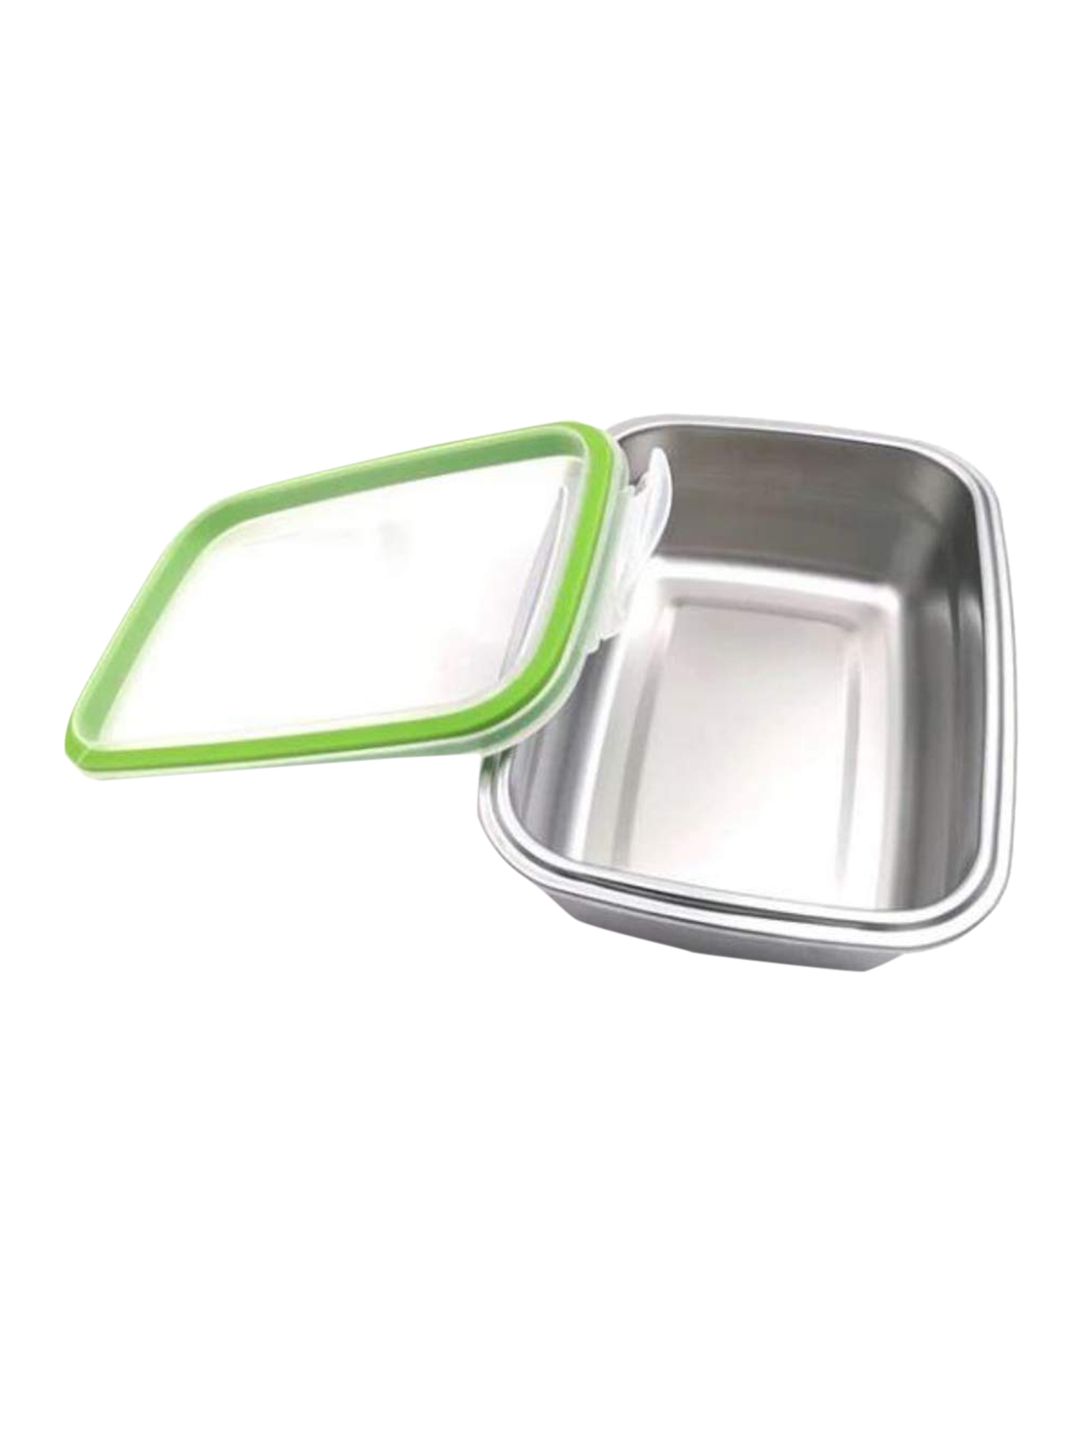 Femora Silver-Toned Stainless Steel Lunch Box 2800ml Price in India